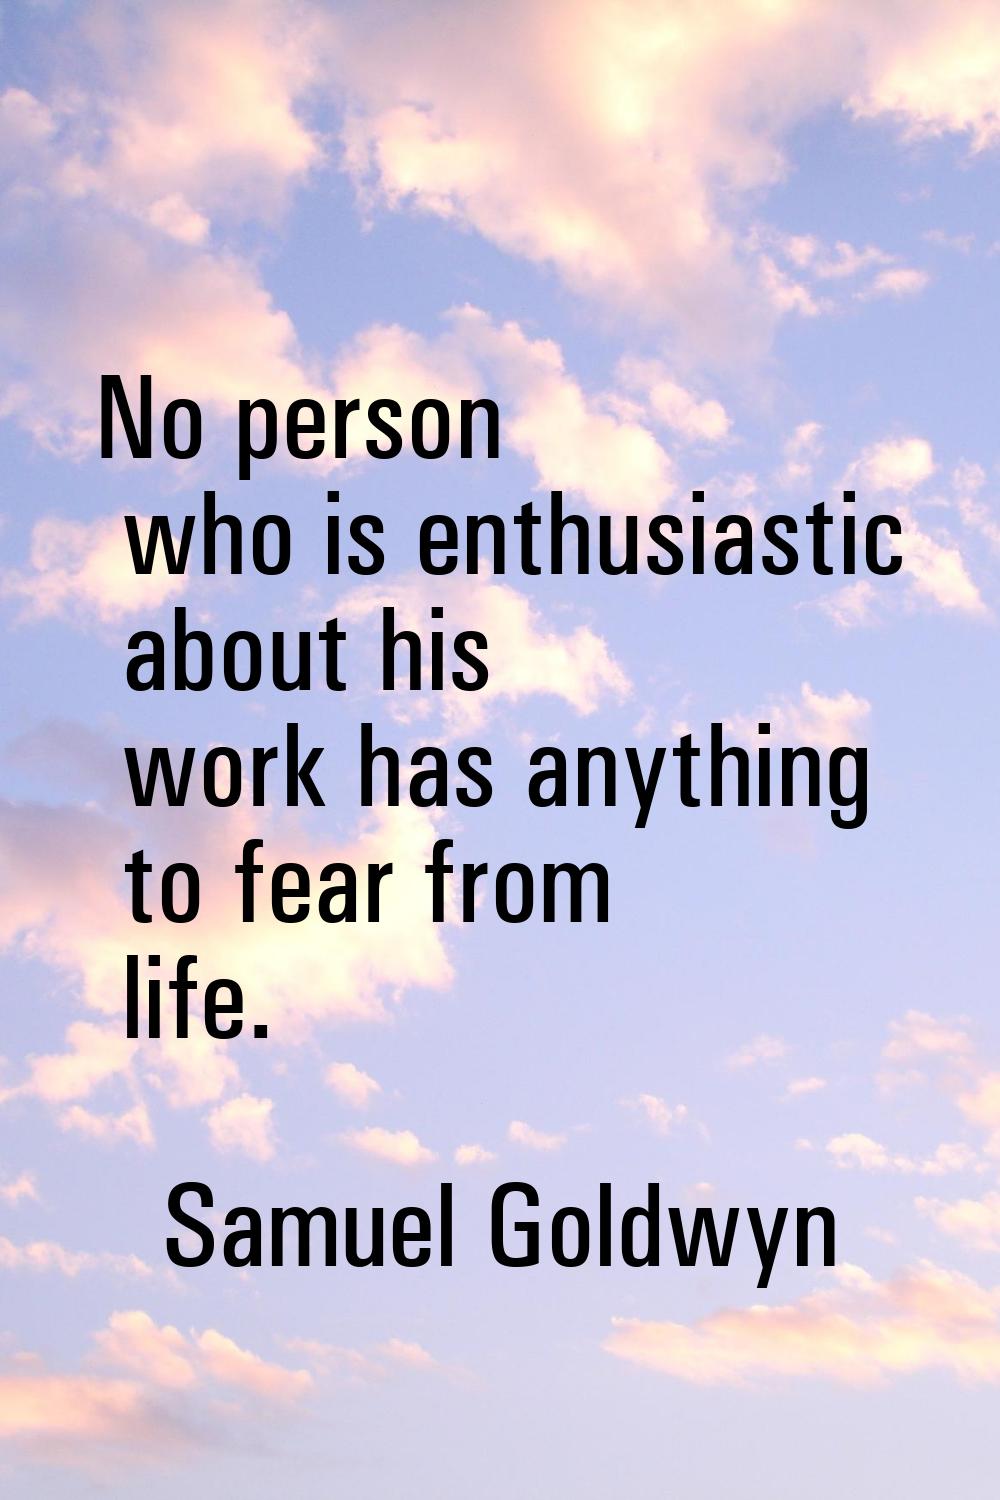 No person who is enthusiastic about his work has anything to fear from life.